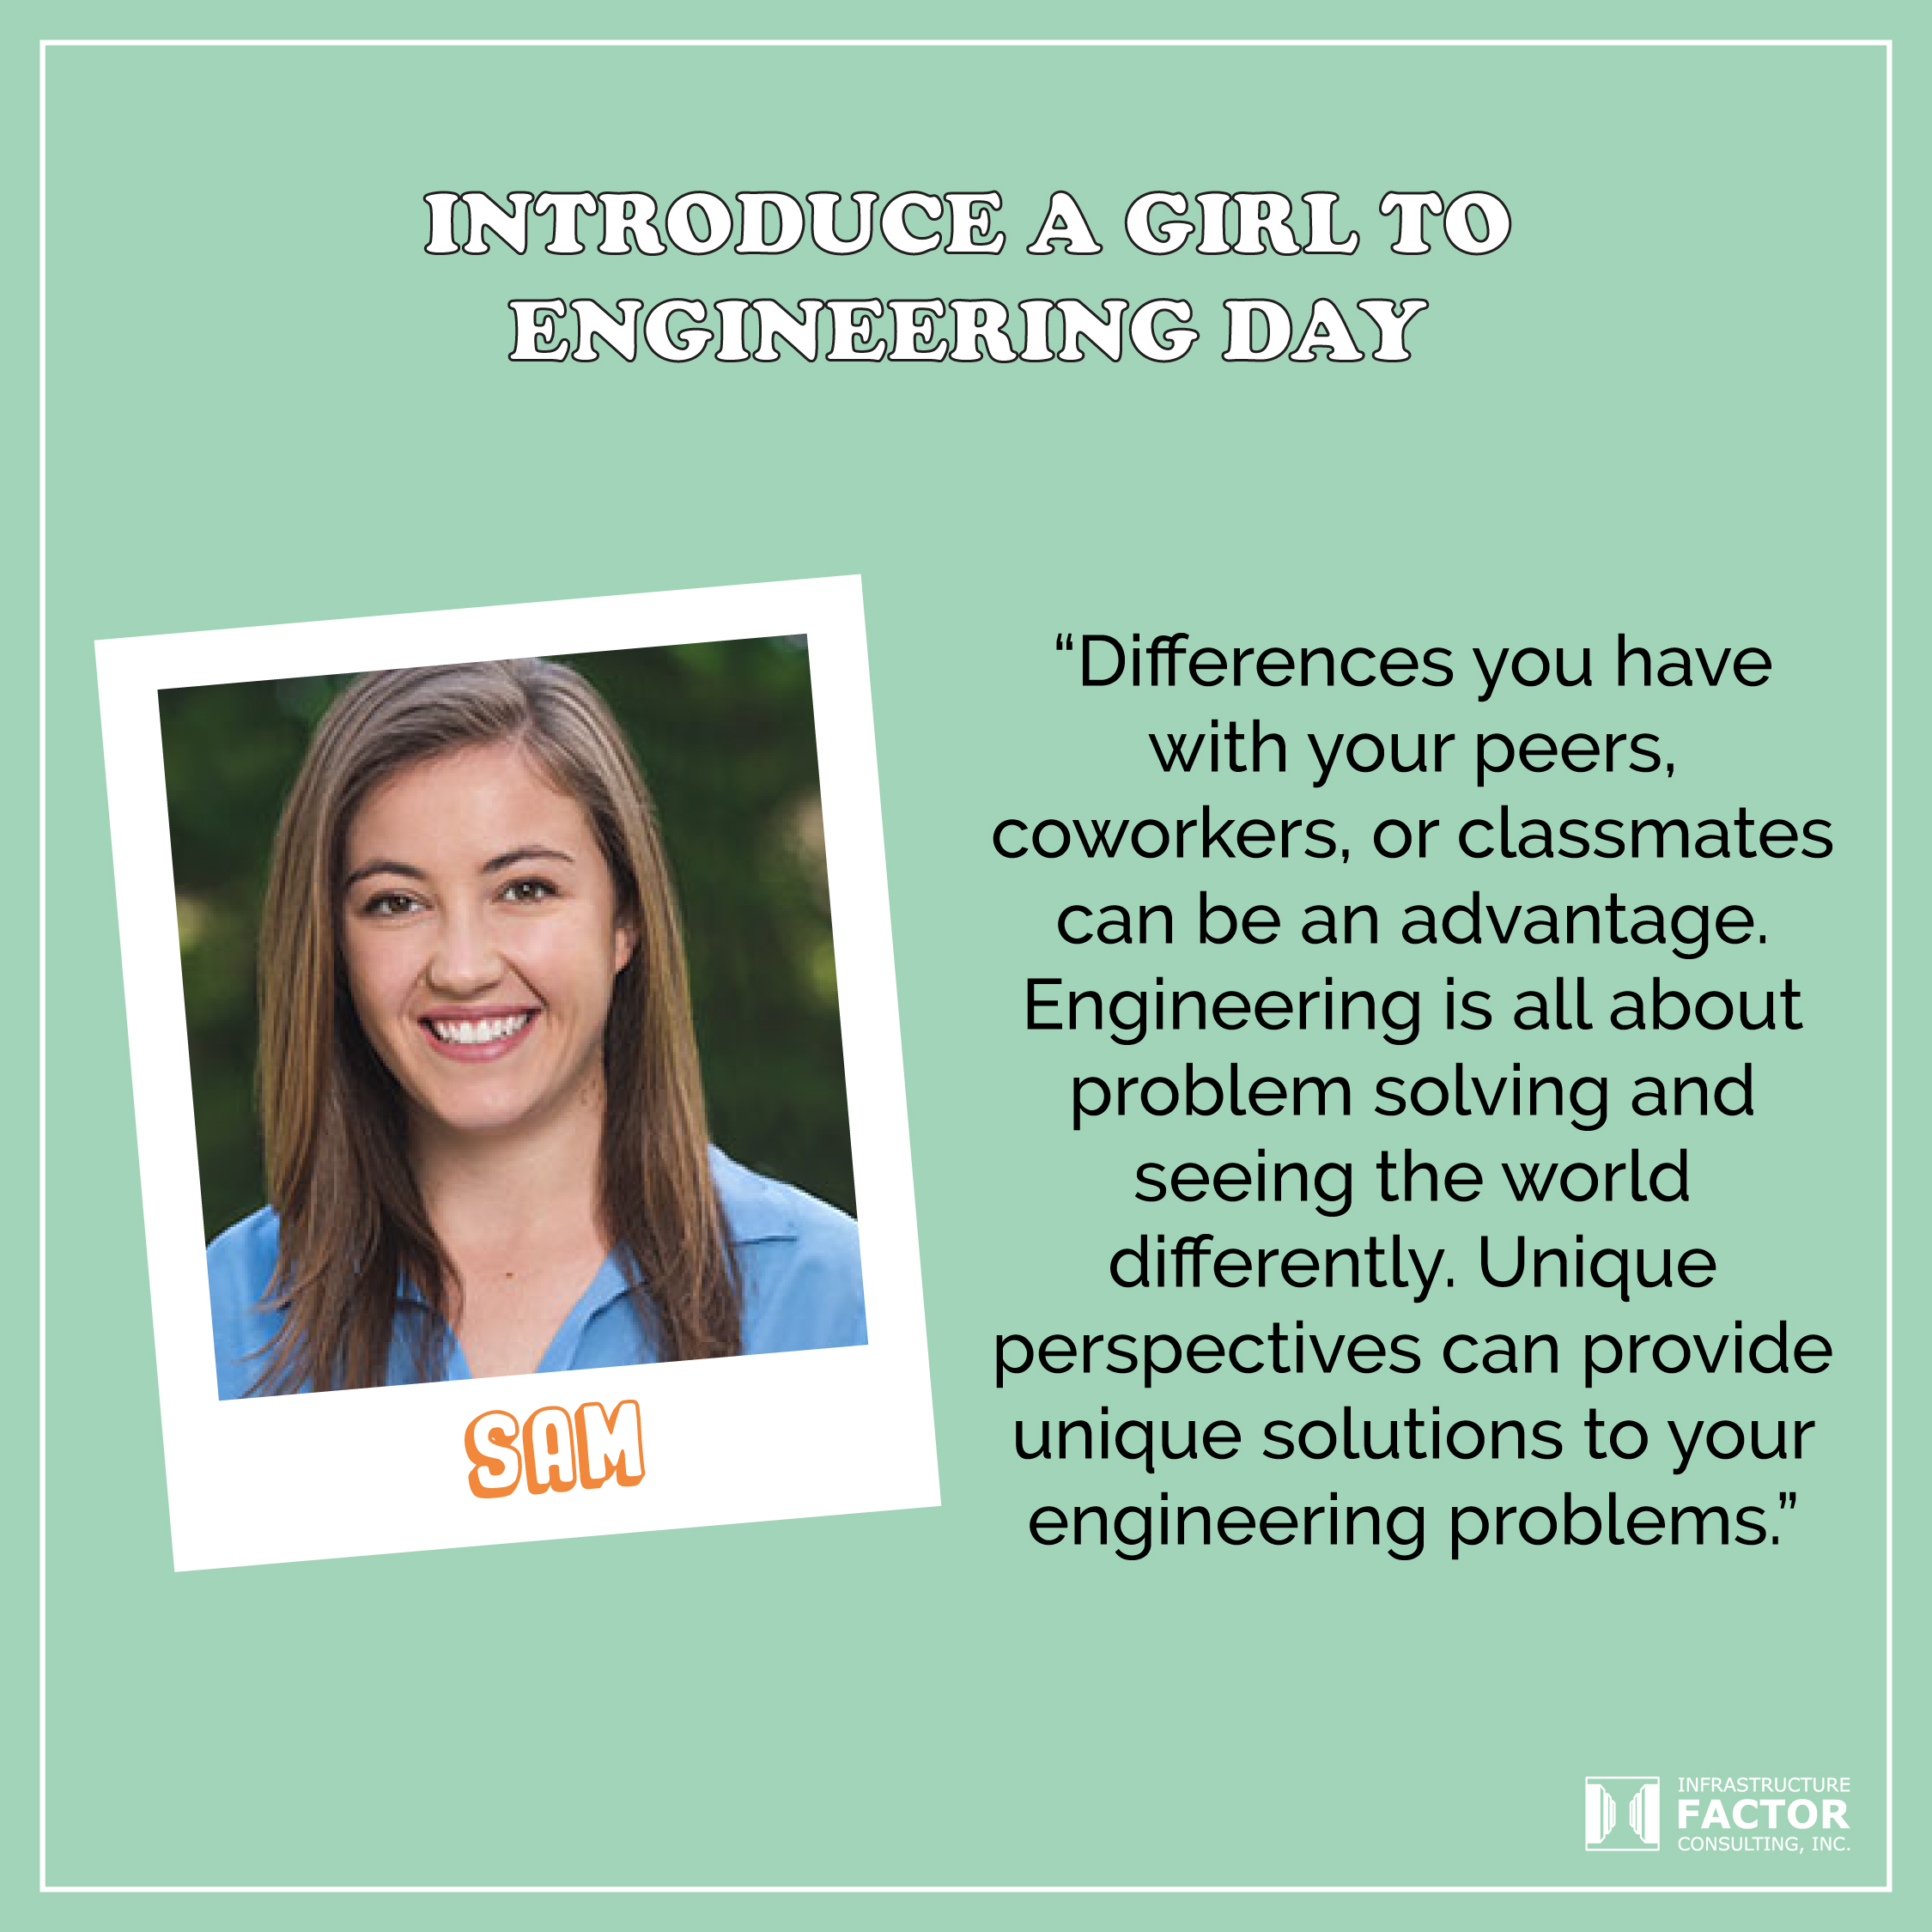 Introduce a Girl to Engineering Day